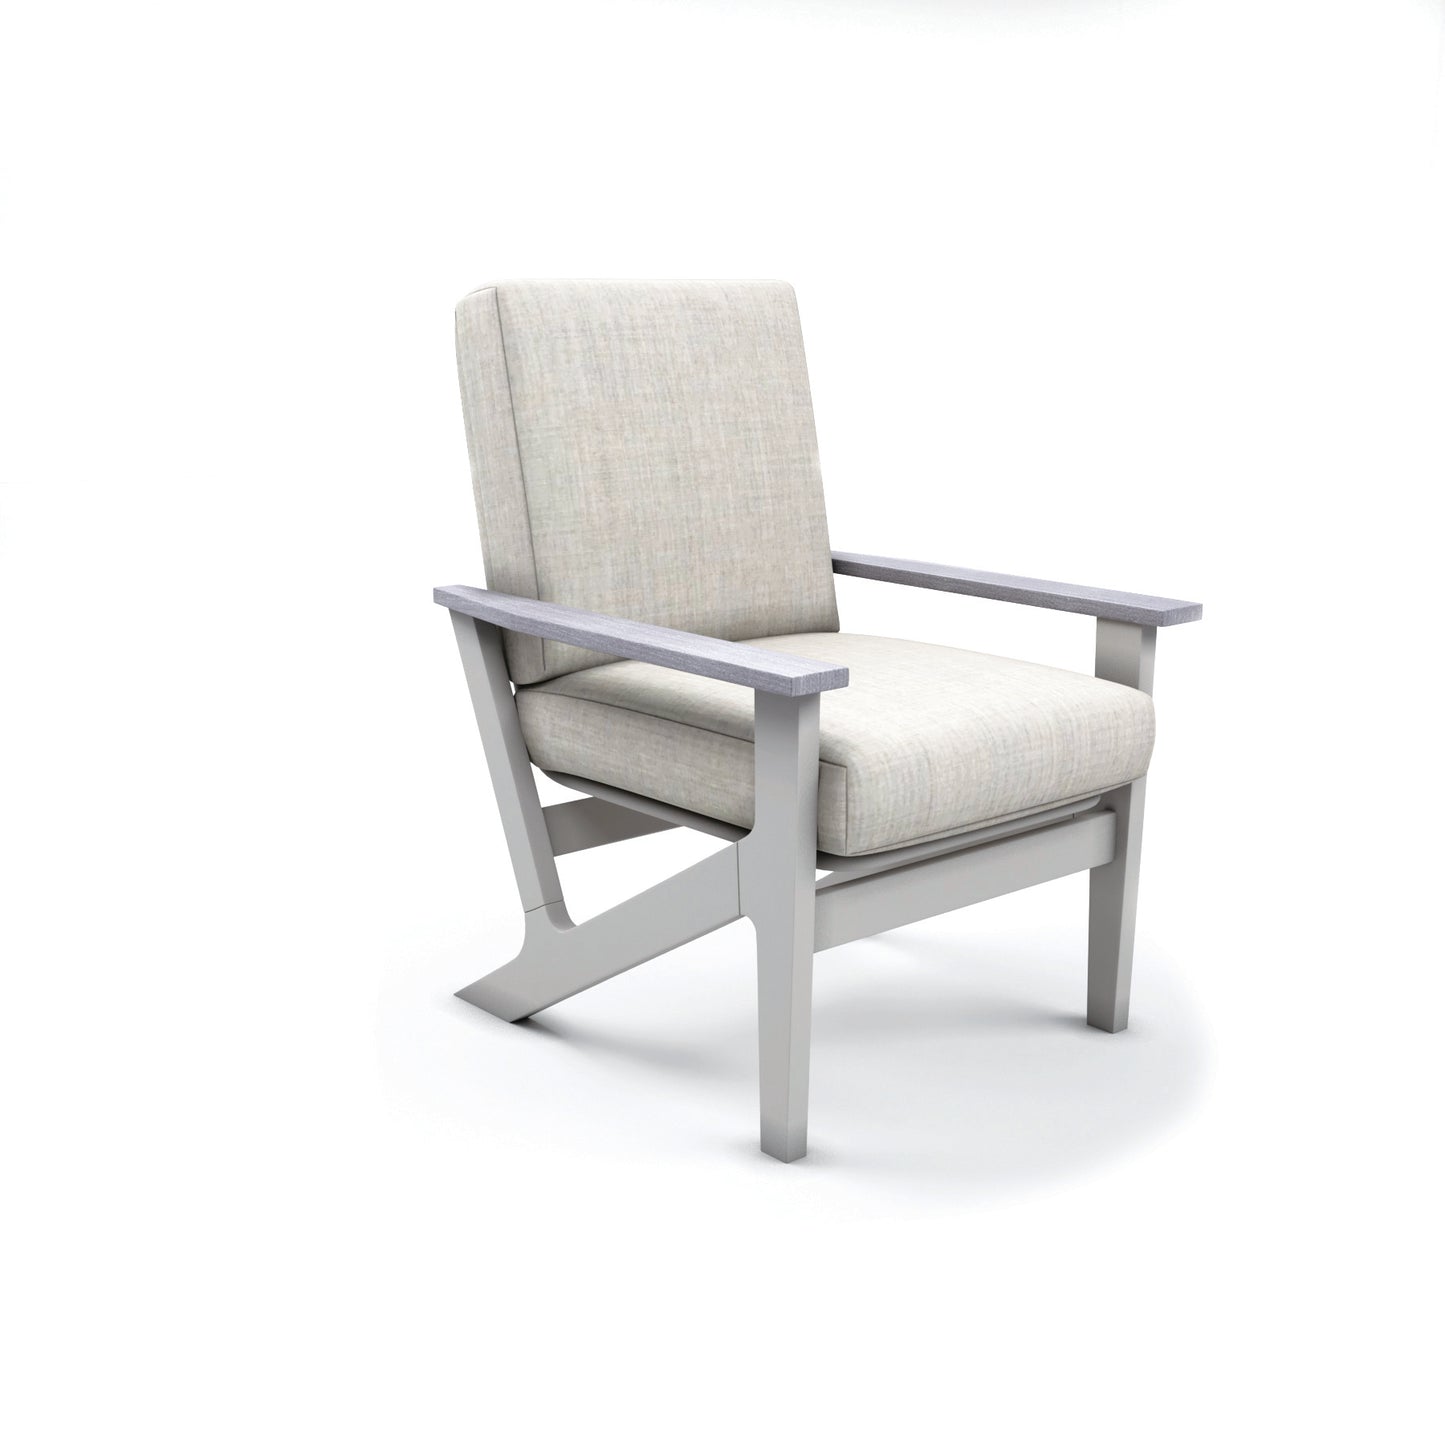 Wexler Cushion Arm Chair with Rustic Arms